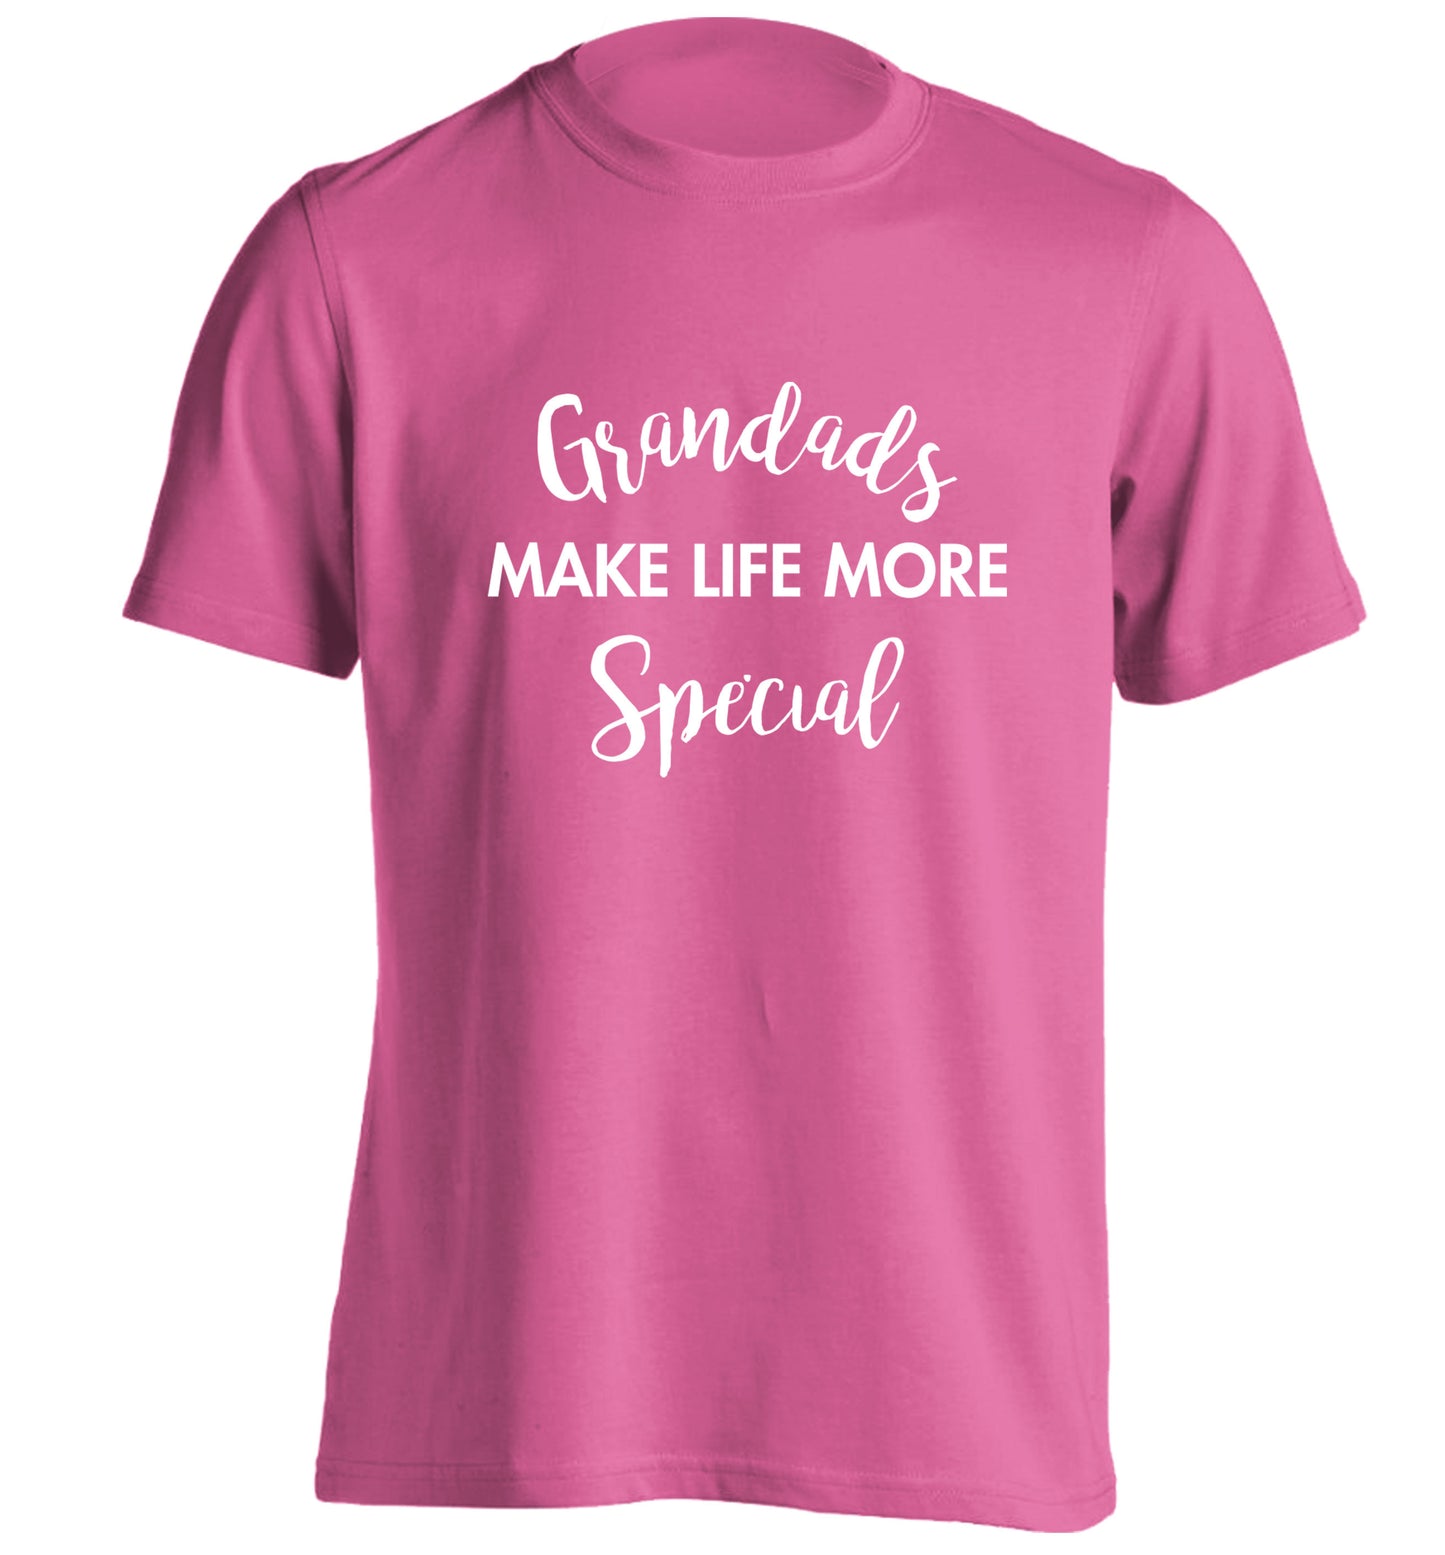 Grandads make life more special adults unisex pink Tshirt 2XL